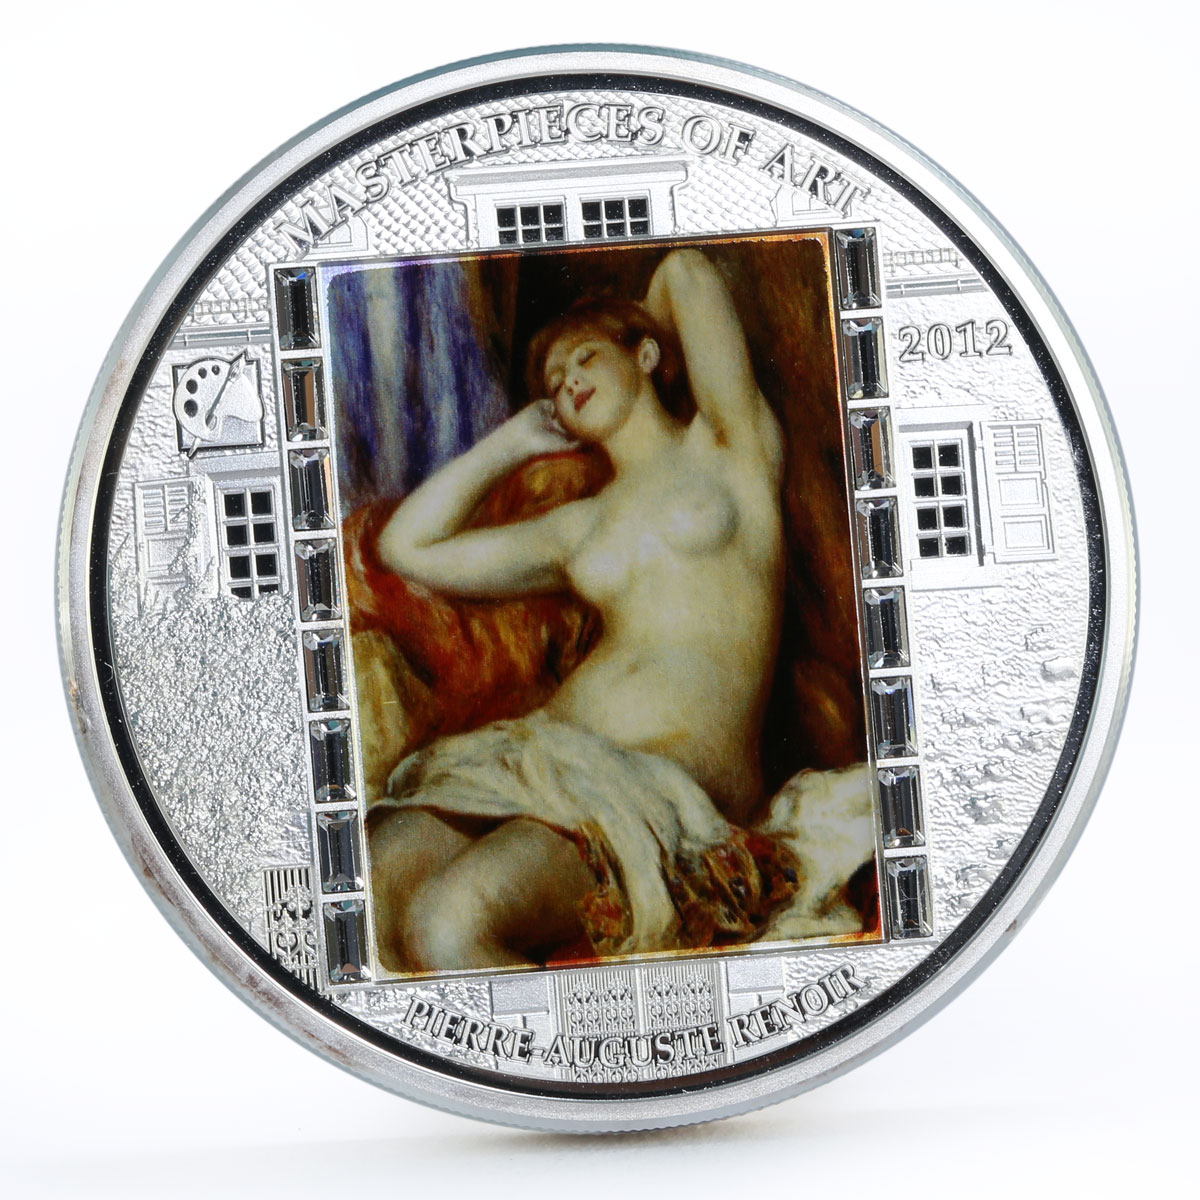 Cook Islands 20 dollars Renoir Art The Sleeping Bather colored silver coin 2012